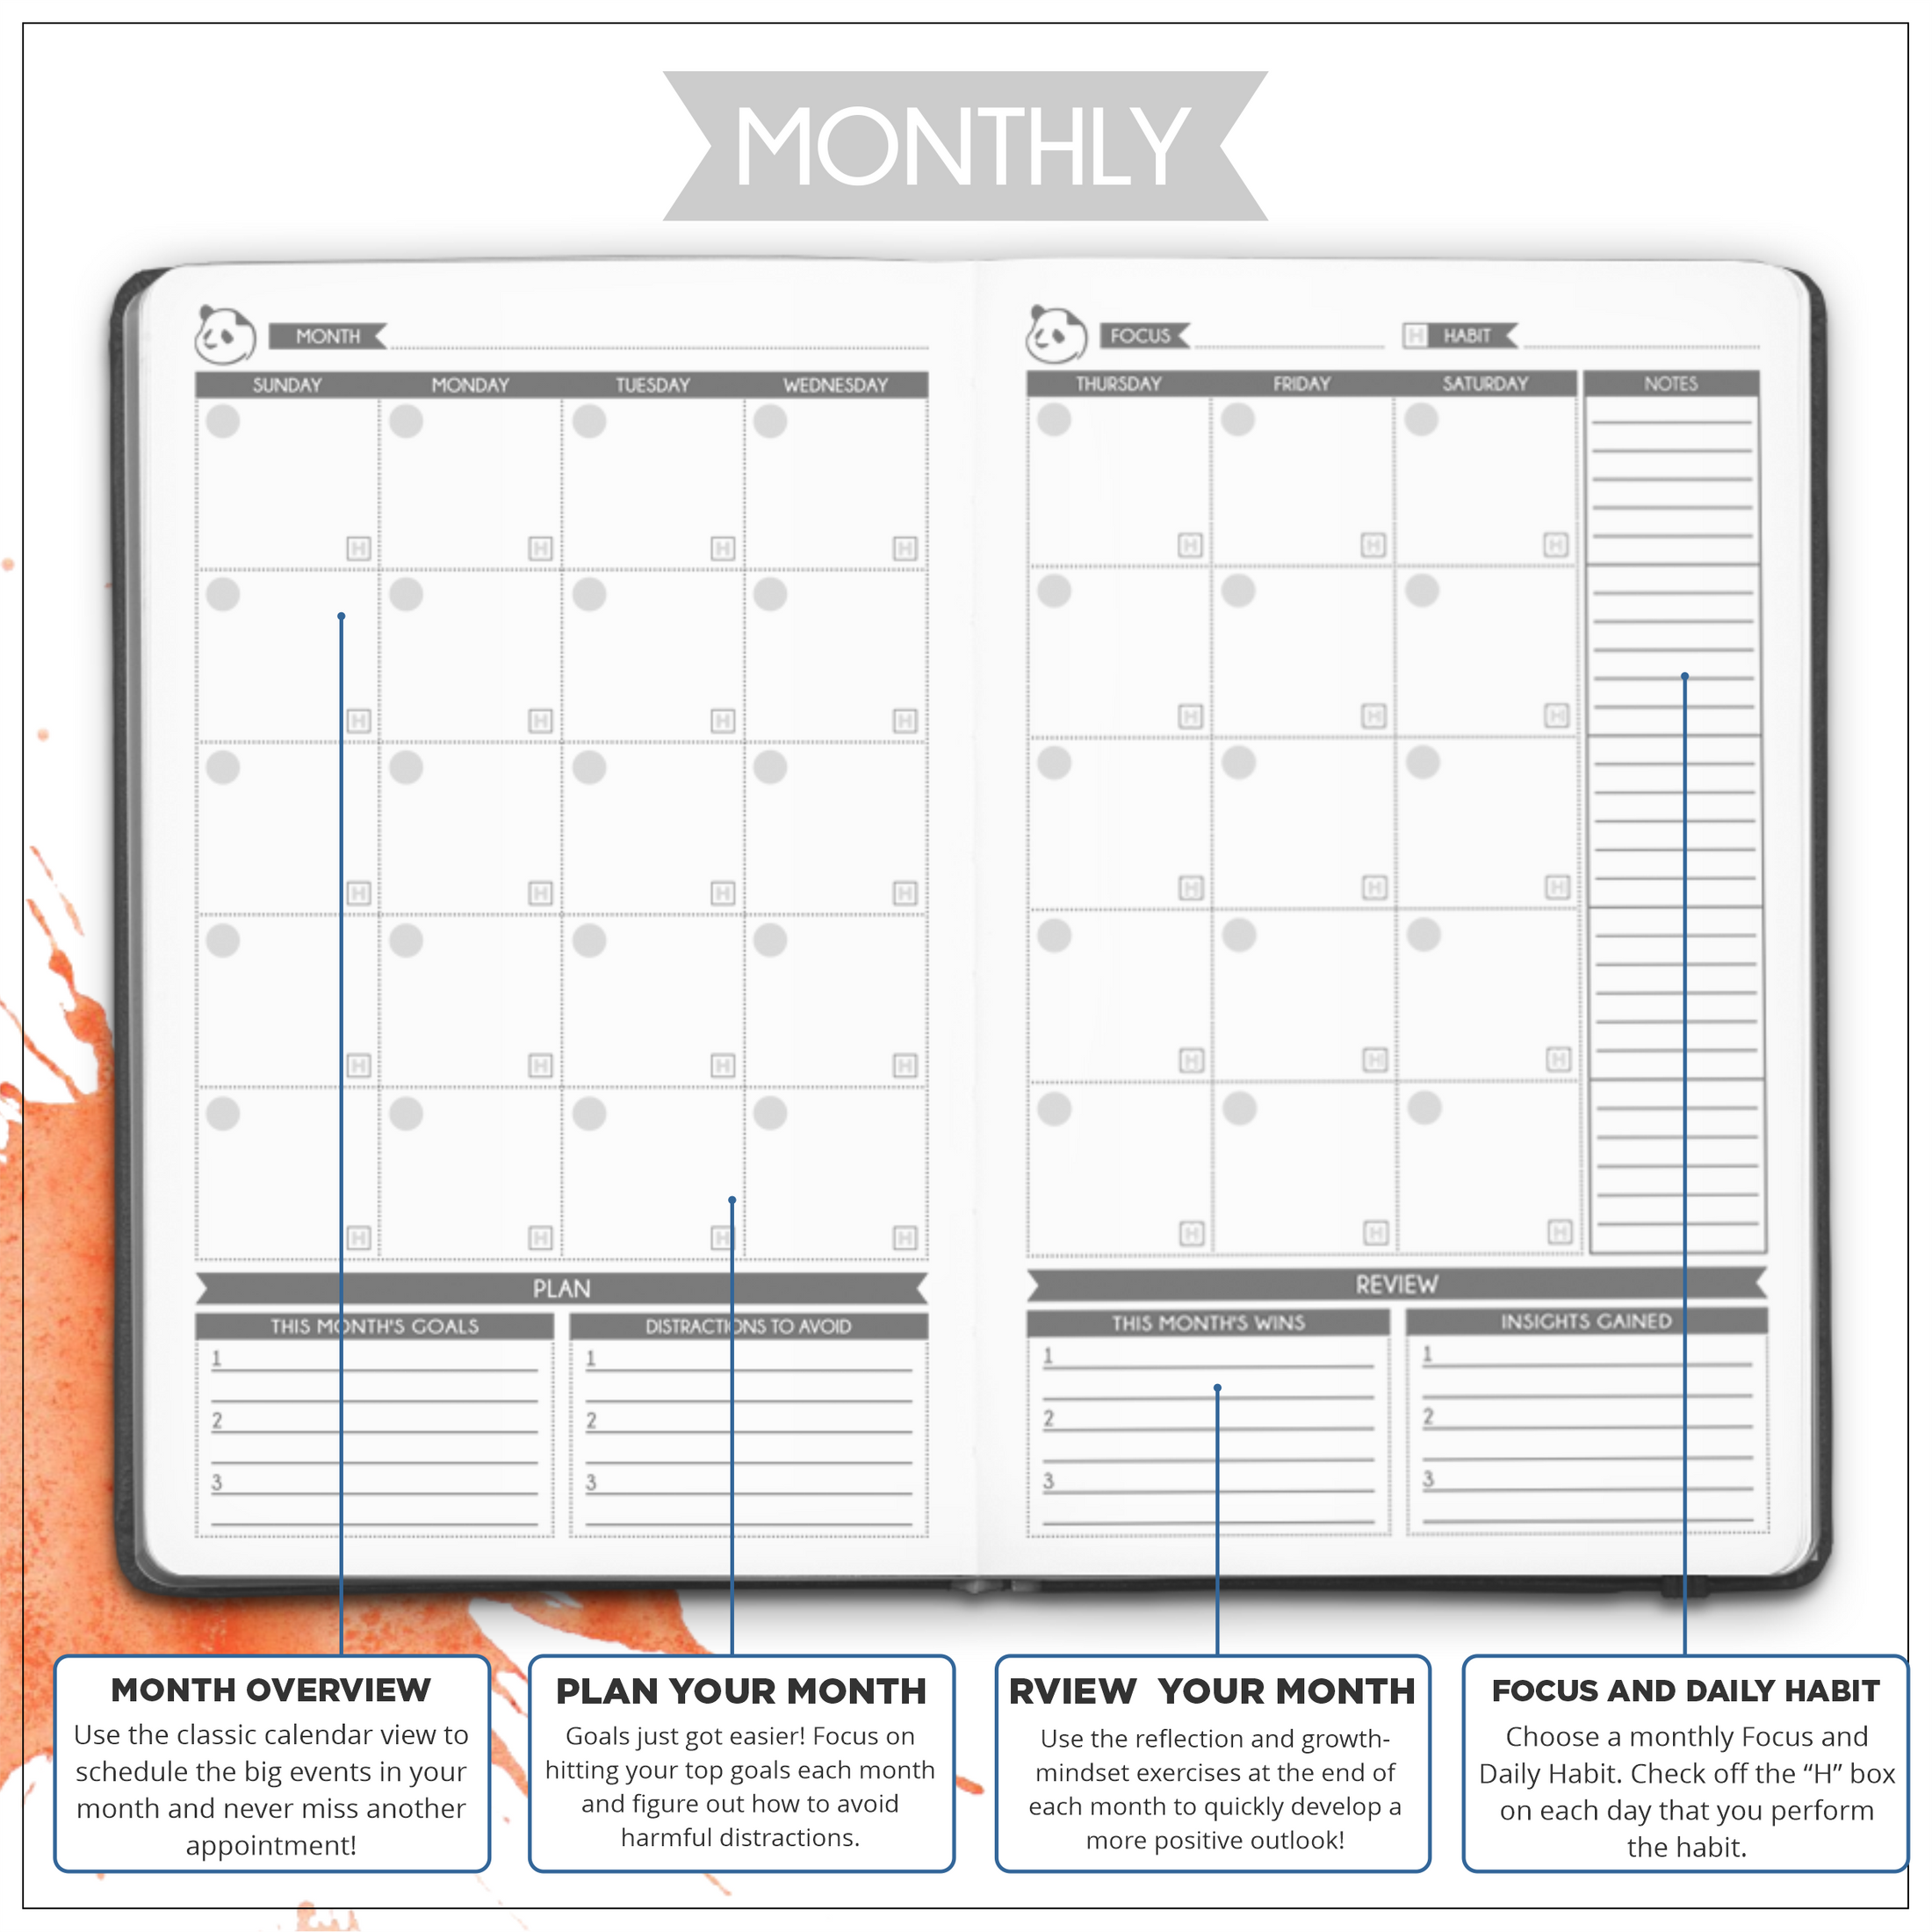 2 - 3 Month Classic - Mindful Daily Planning in 3 Sections - Monthly, Weekly & Daily Pages - You Pick the Colors